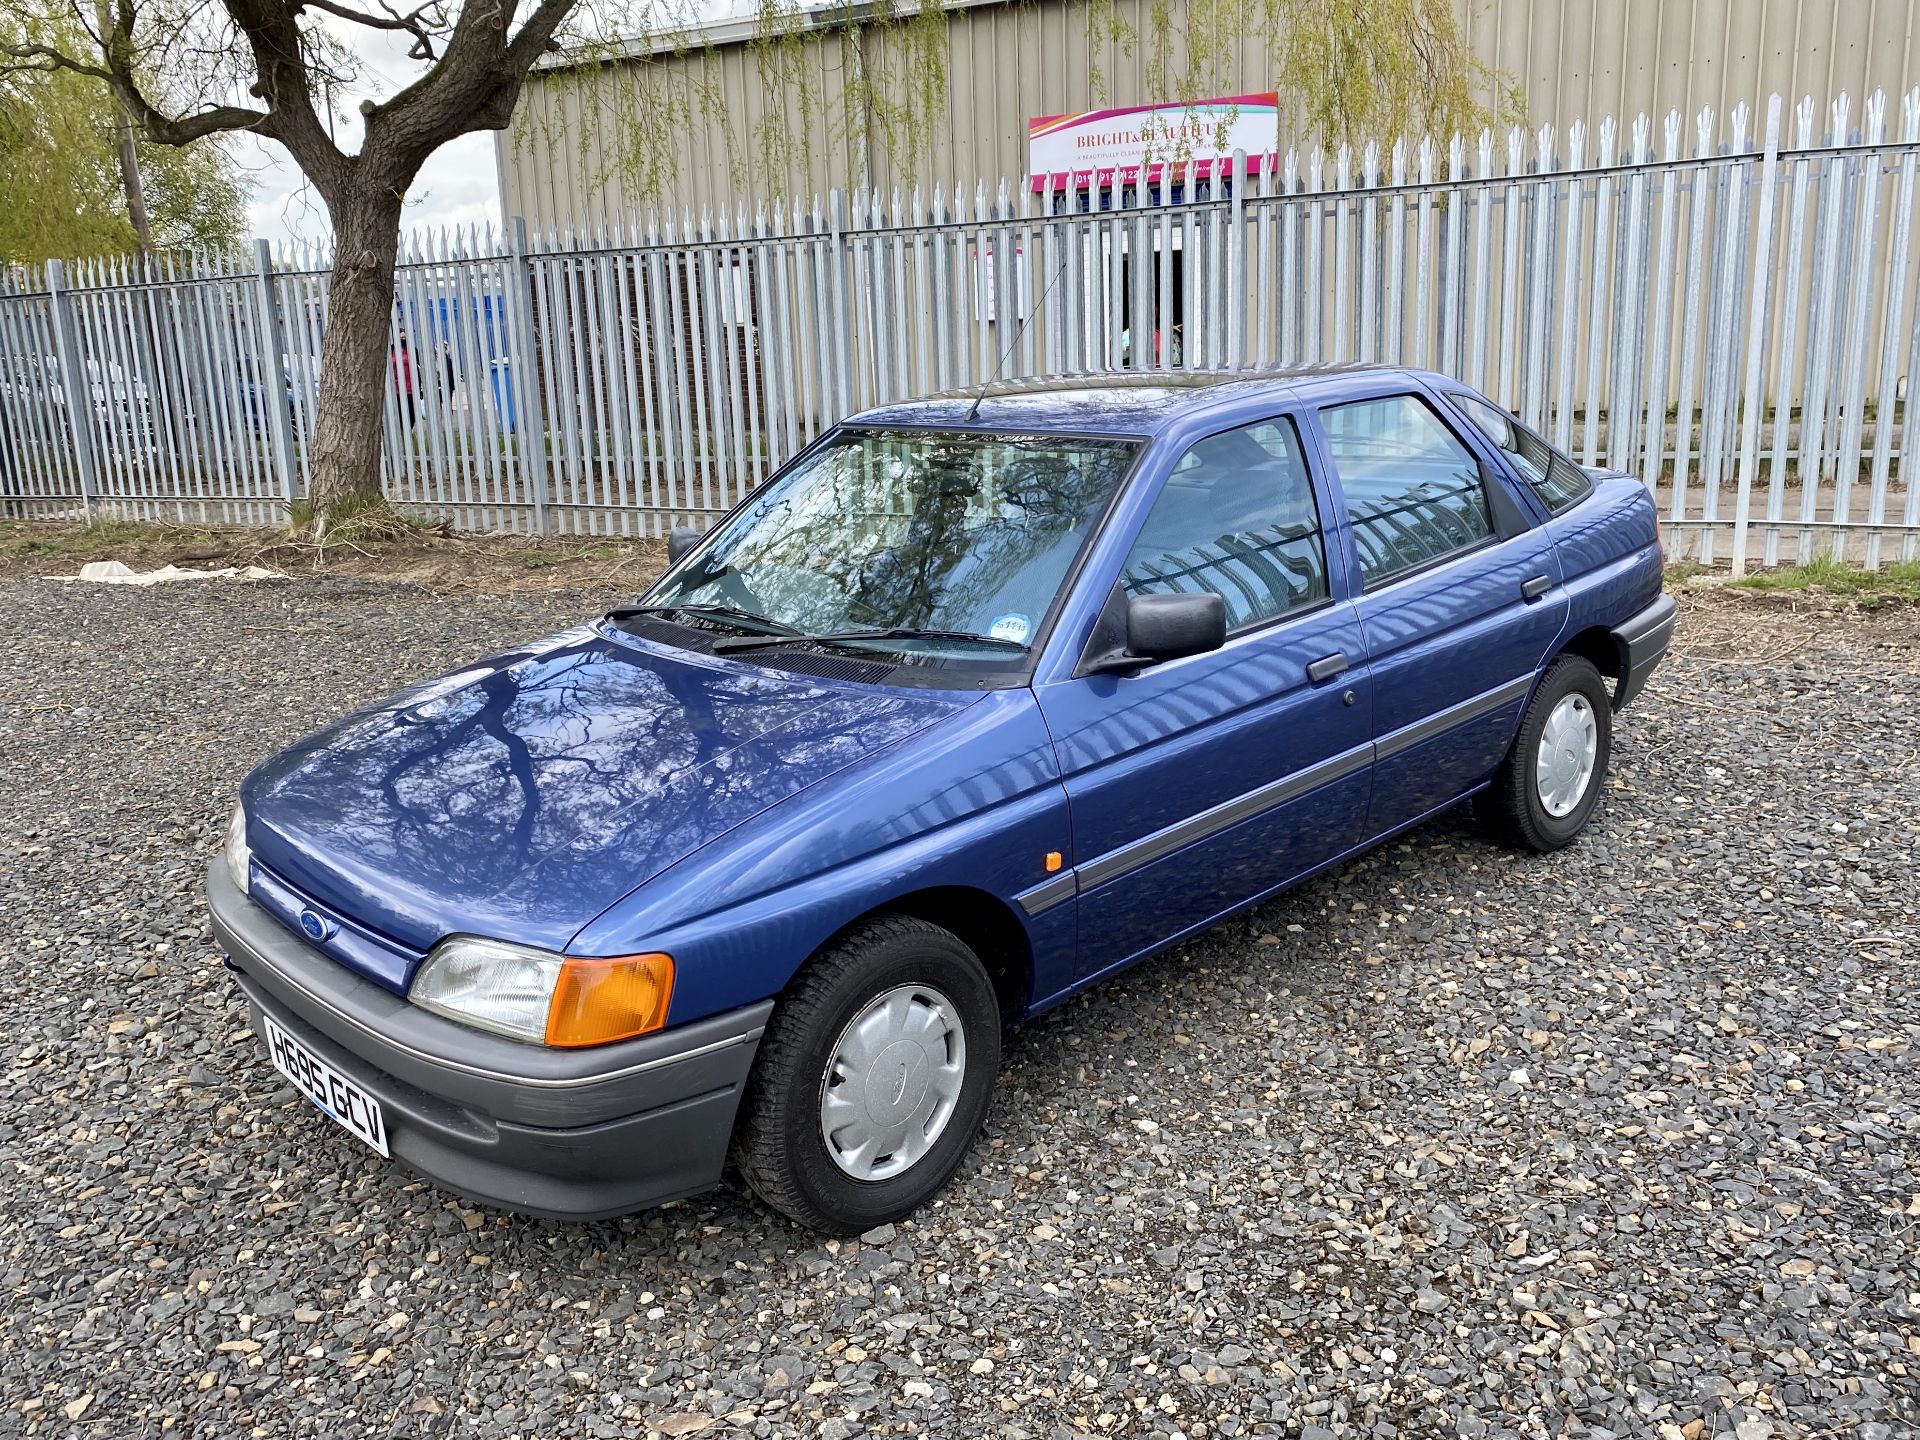 Ford Escort LX1.4 - Image 18 of 54